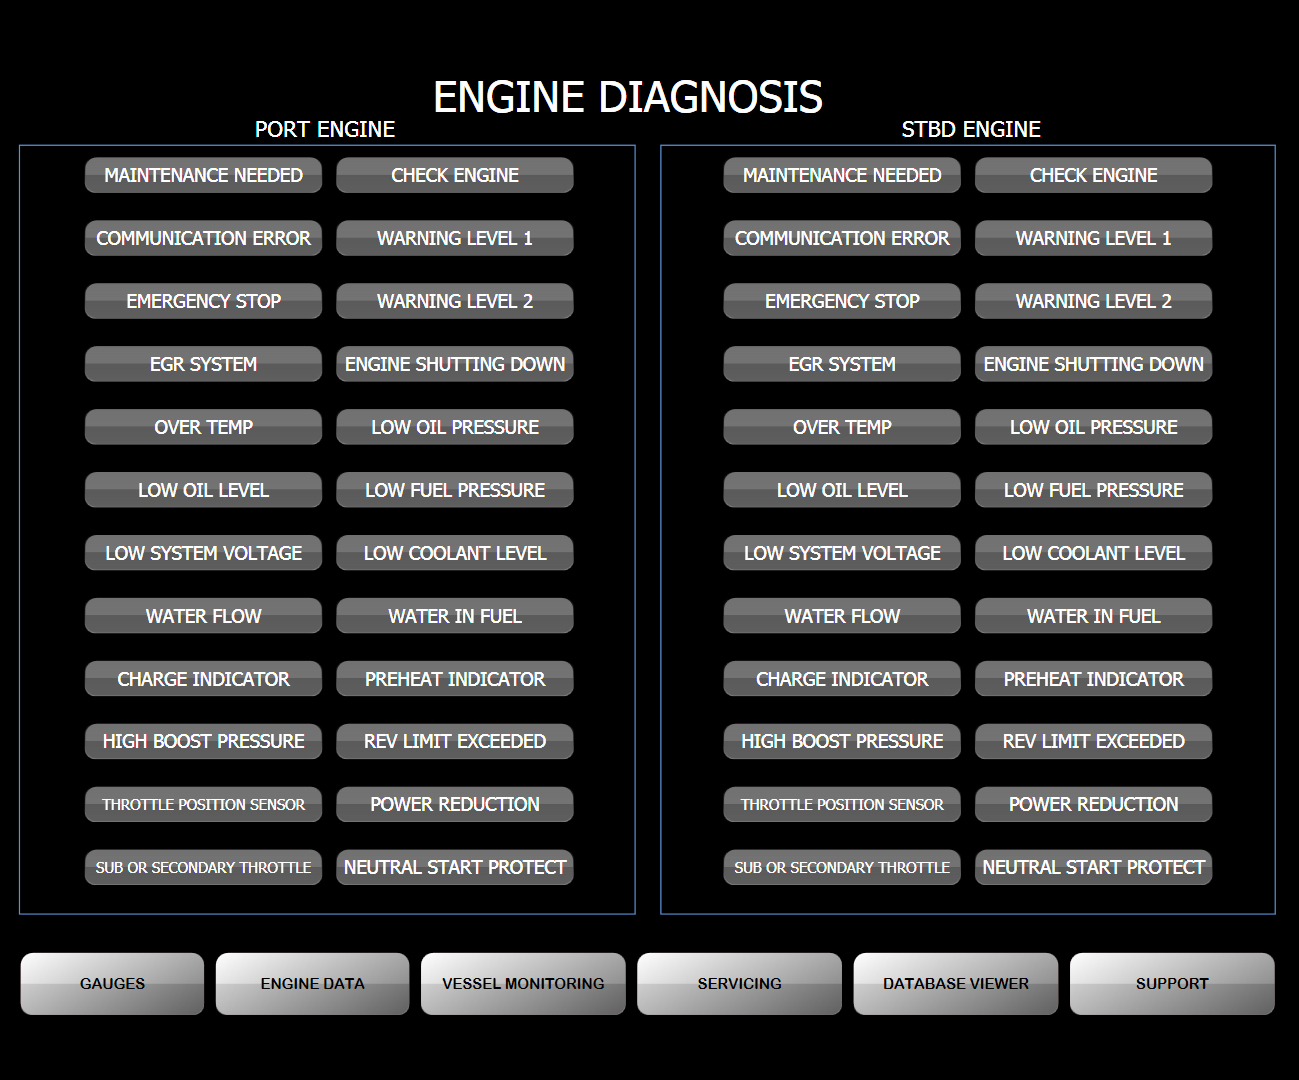 AVM software developed for Canadian Coast Guard. Engine Diagnosis screen